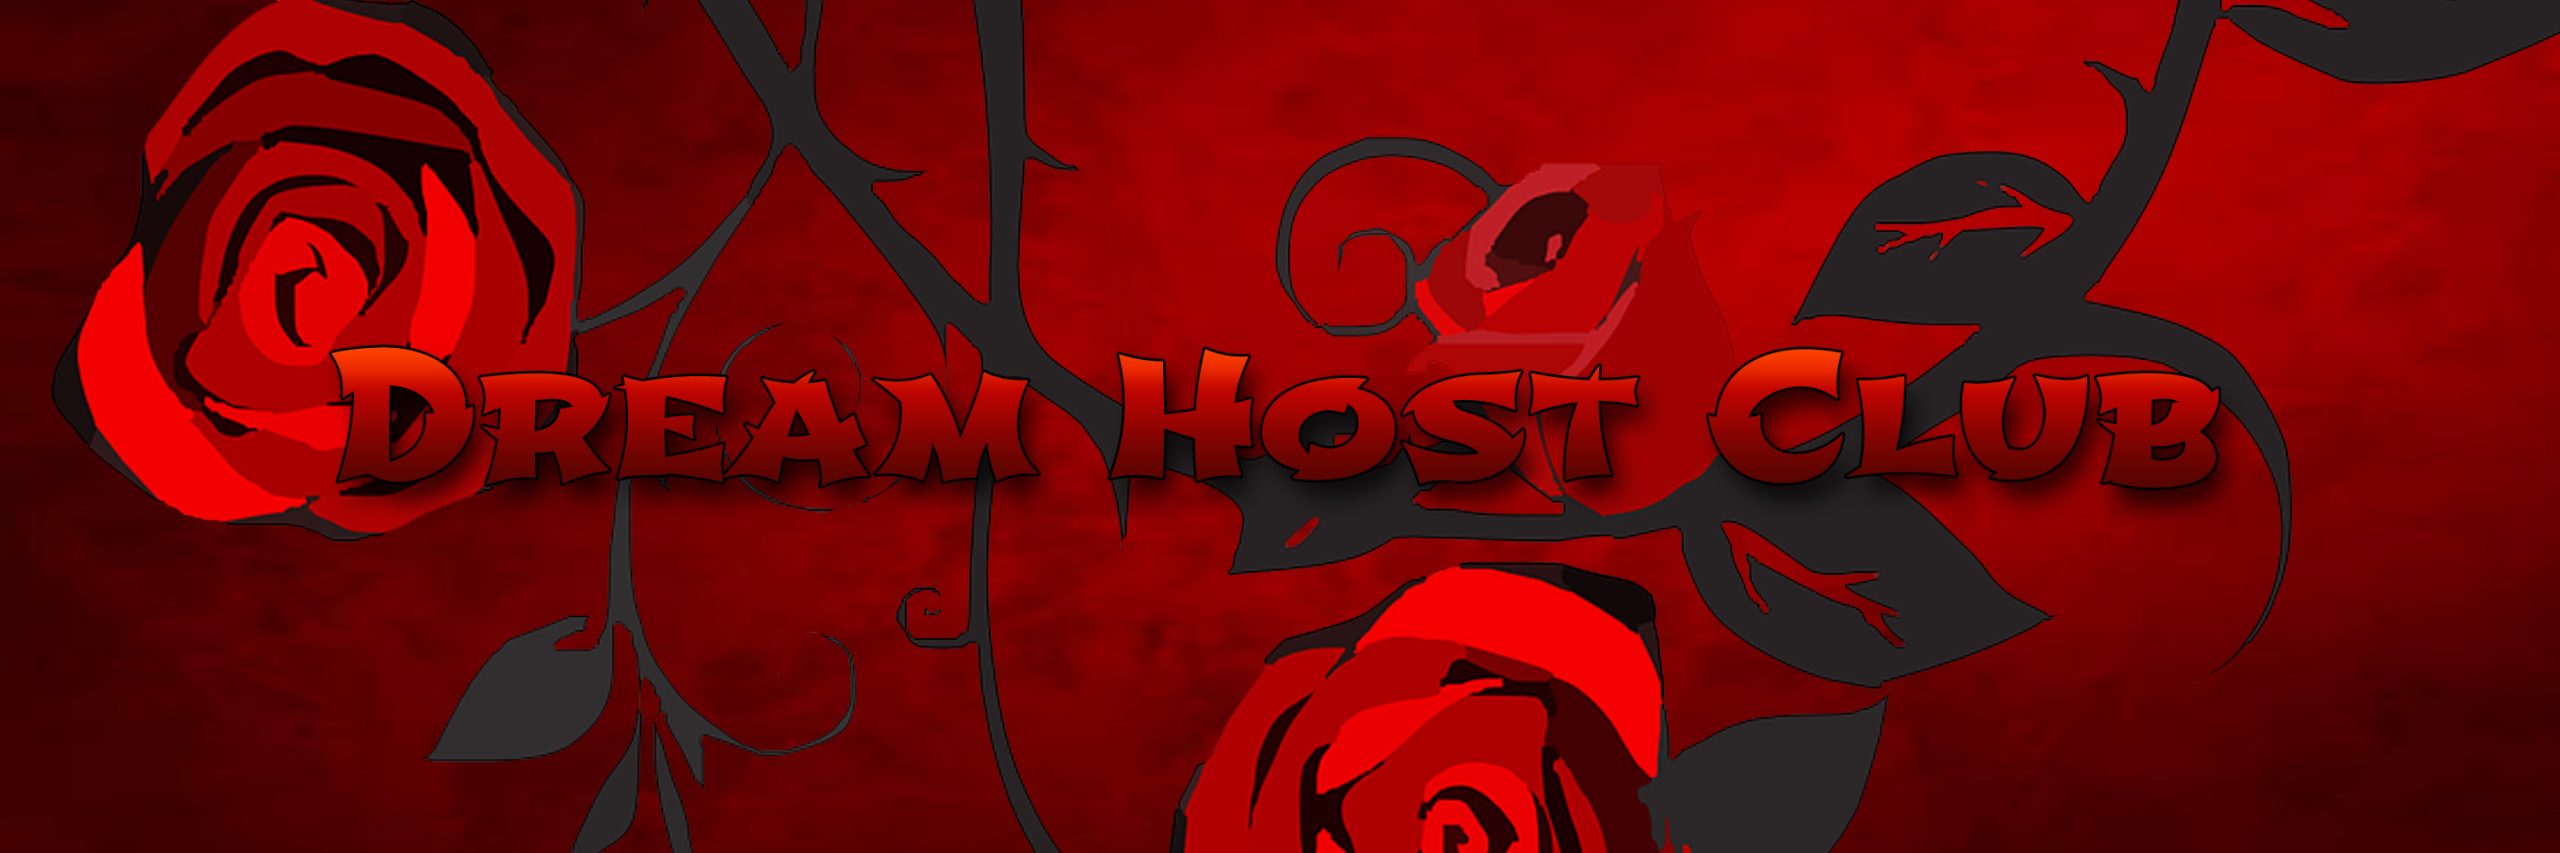 Host Club Banner - Join us